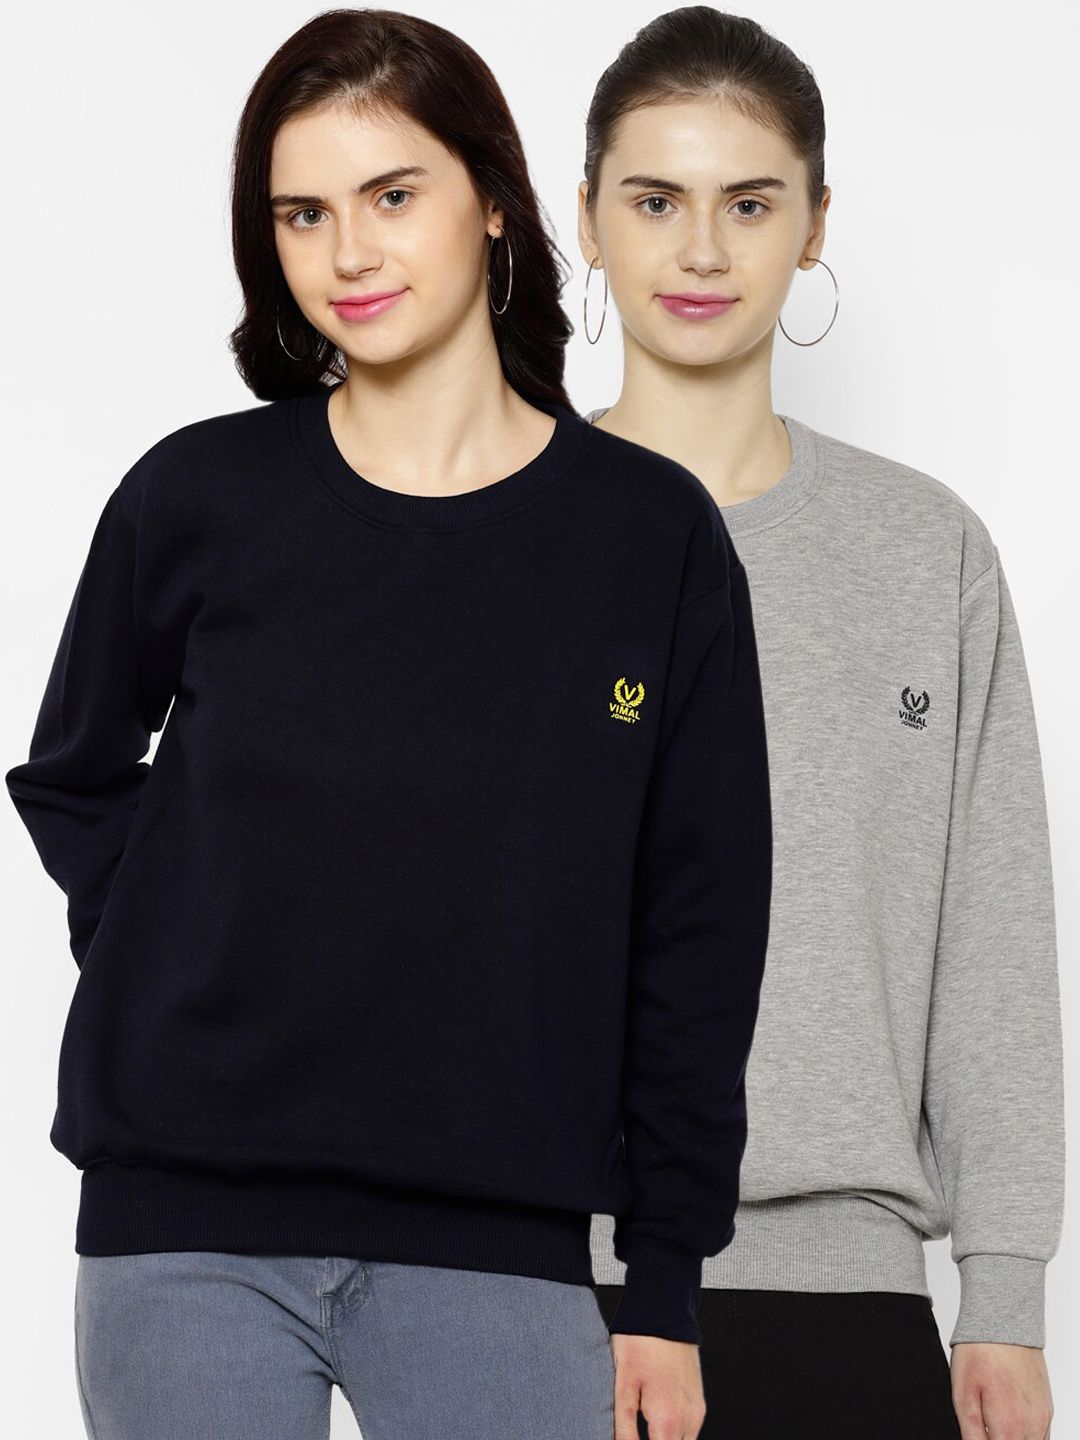 VIMAL JONNEY Women Grey and Navy Blue Pack of 2 Solid Sweatshirts Price in India